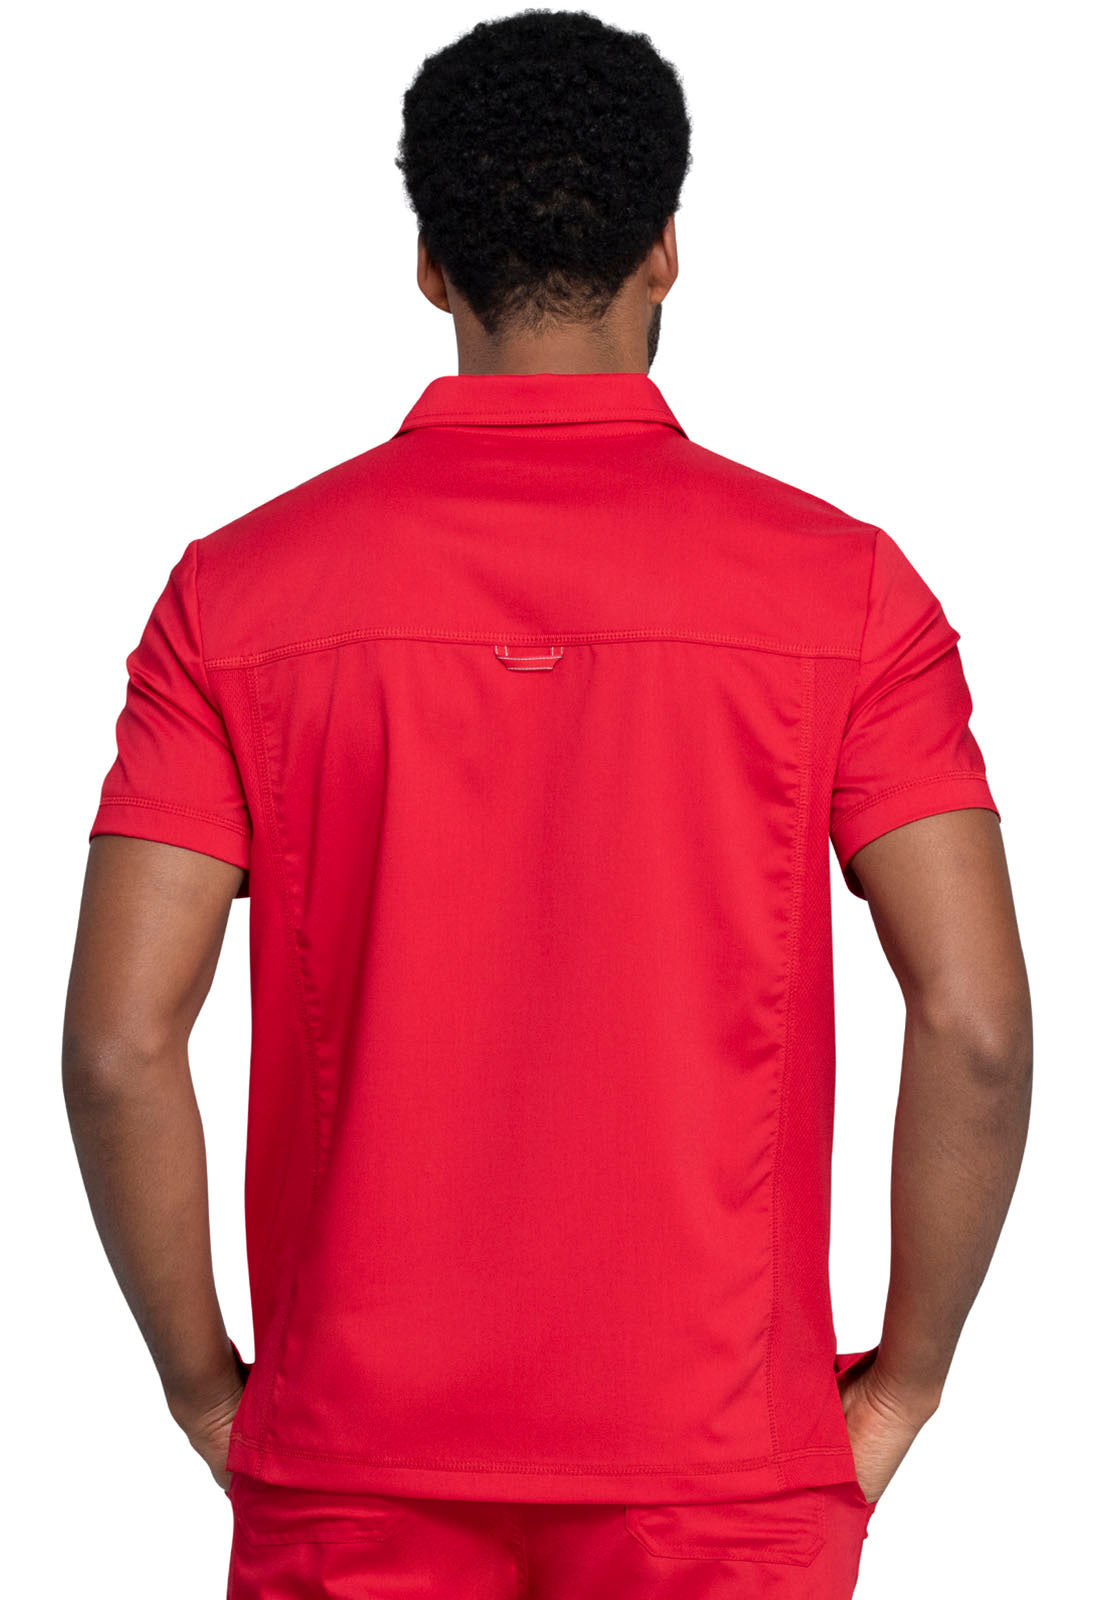 Polo pour homme en rouge WW Revolution WW615 RED 